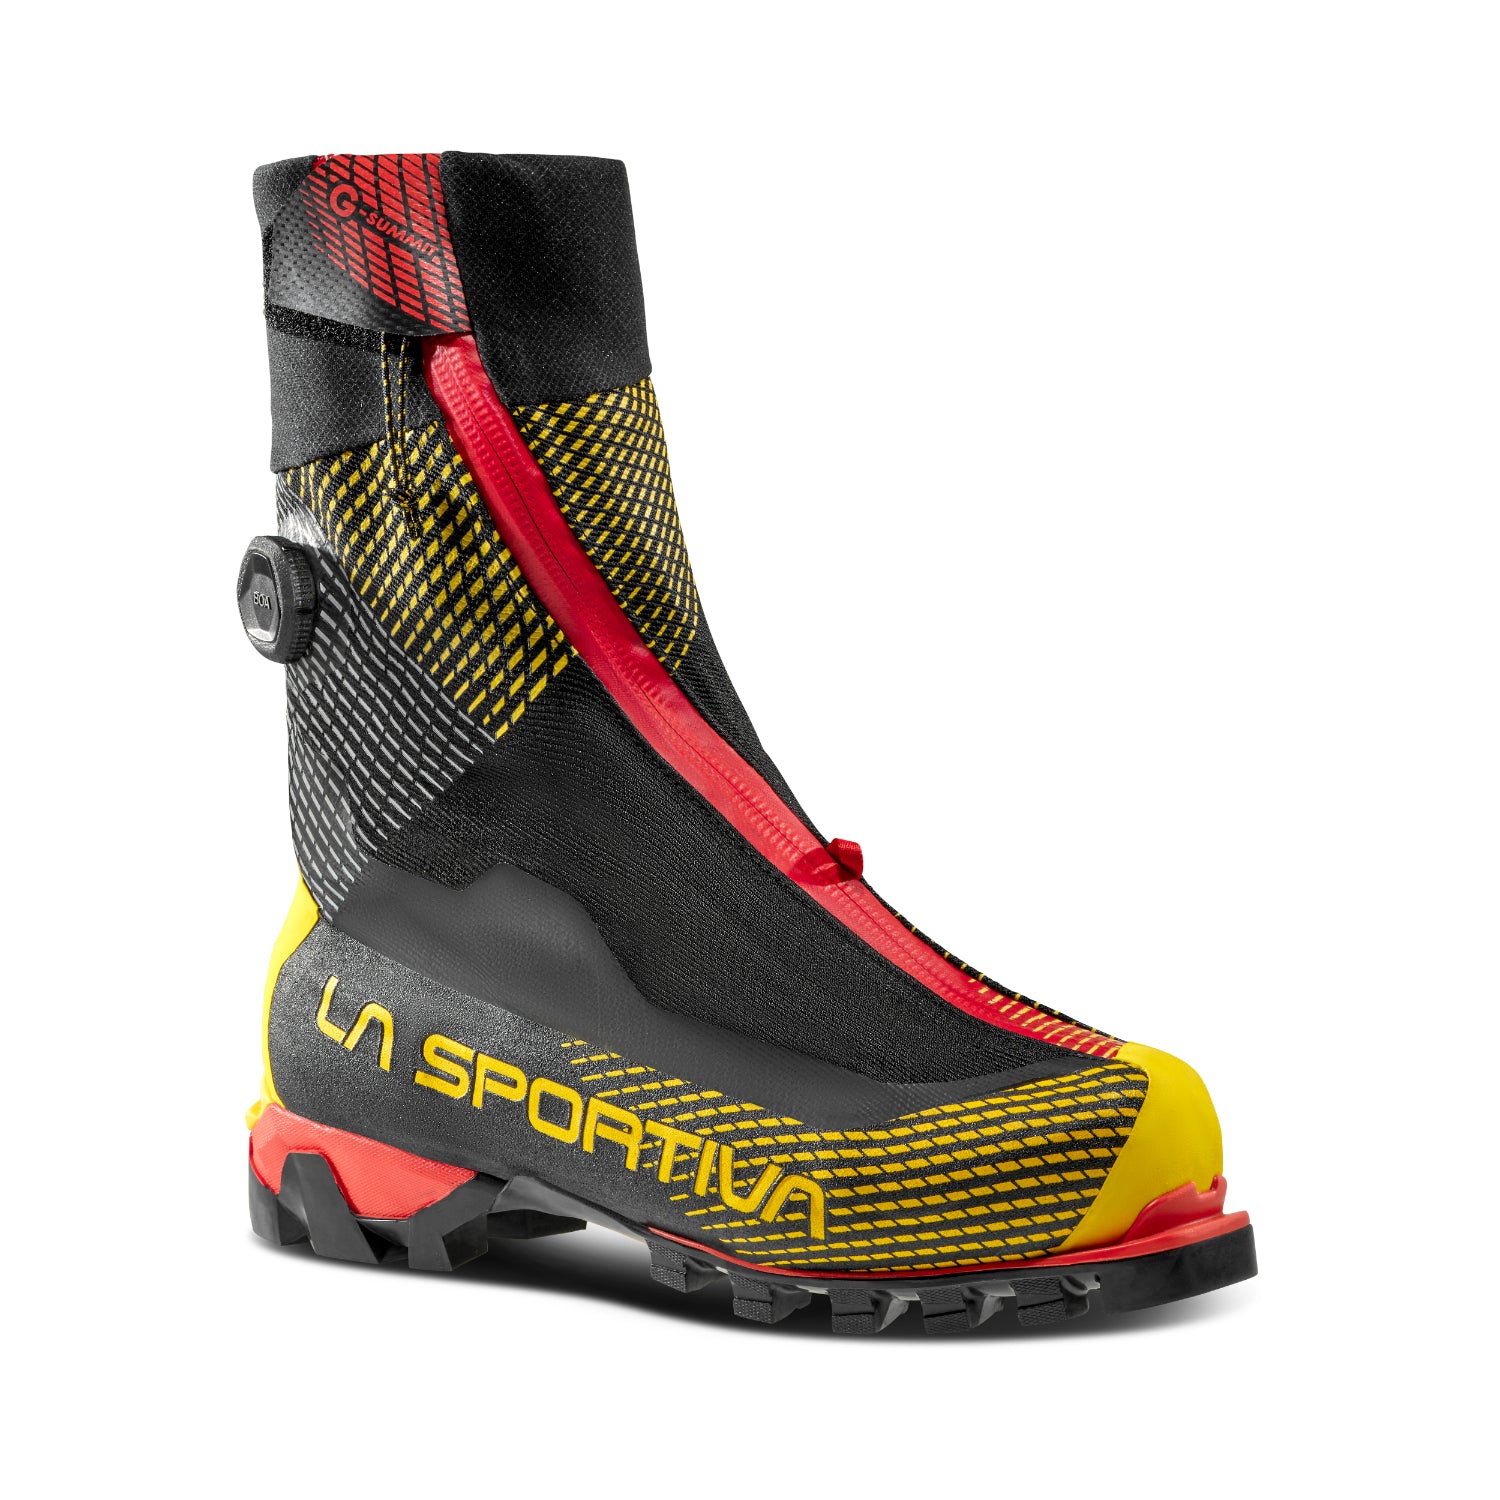 La Sportiva G-Summit mountaineering boots in black yellow and red.